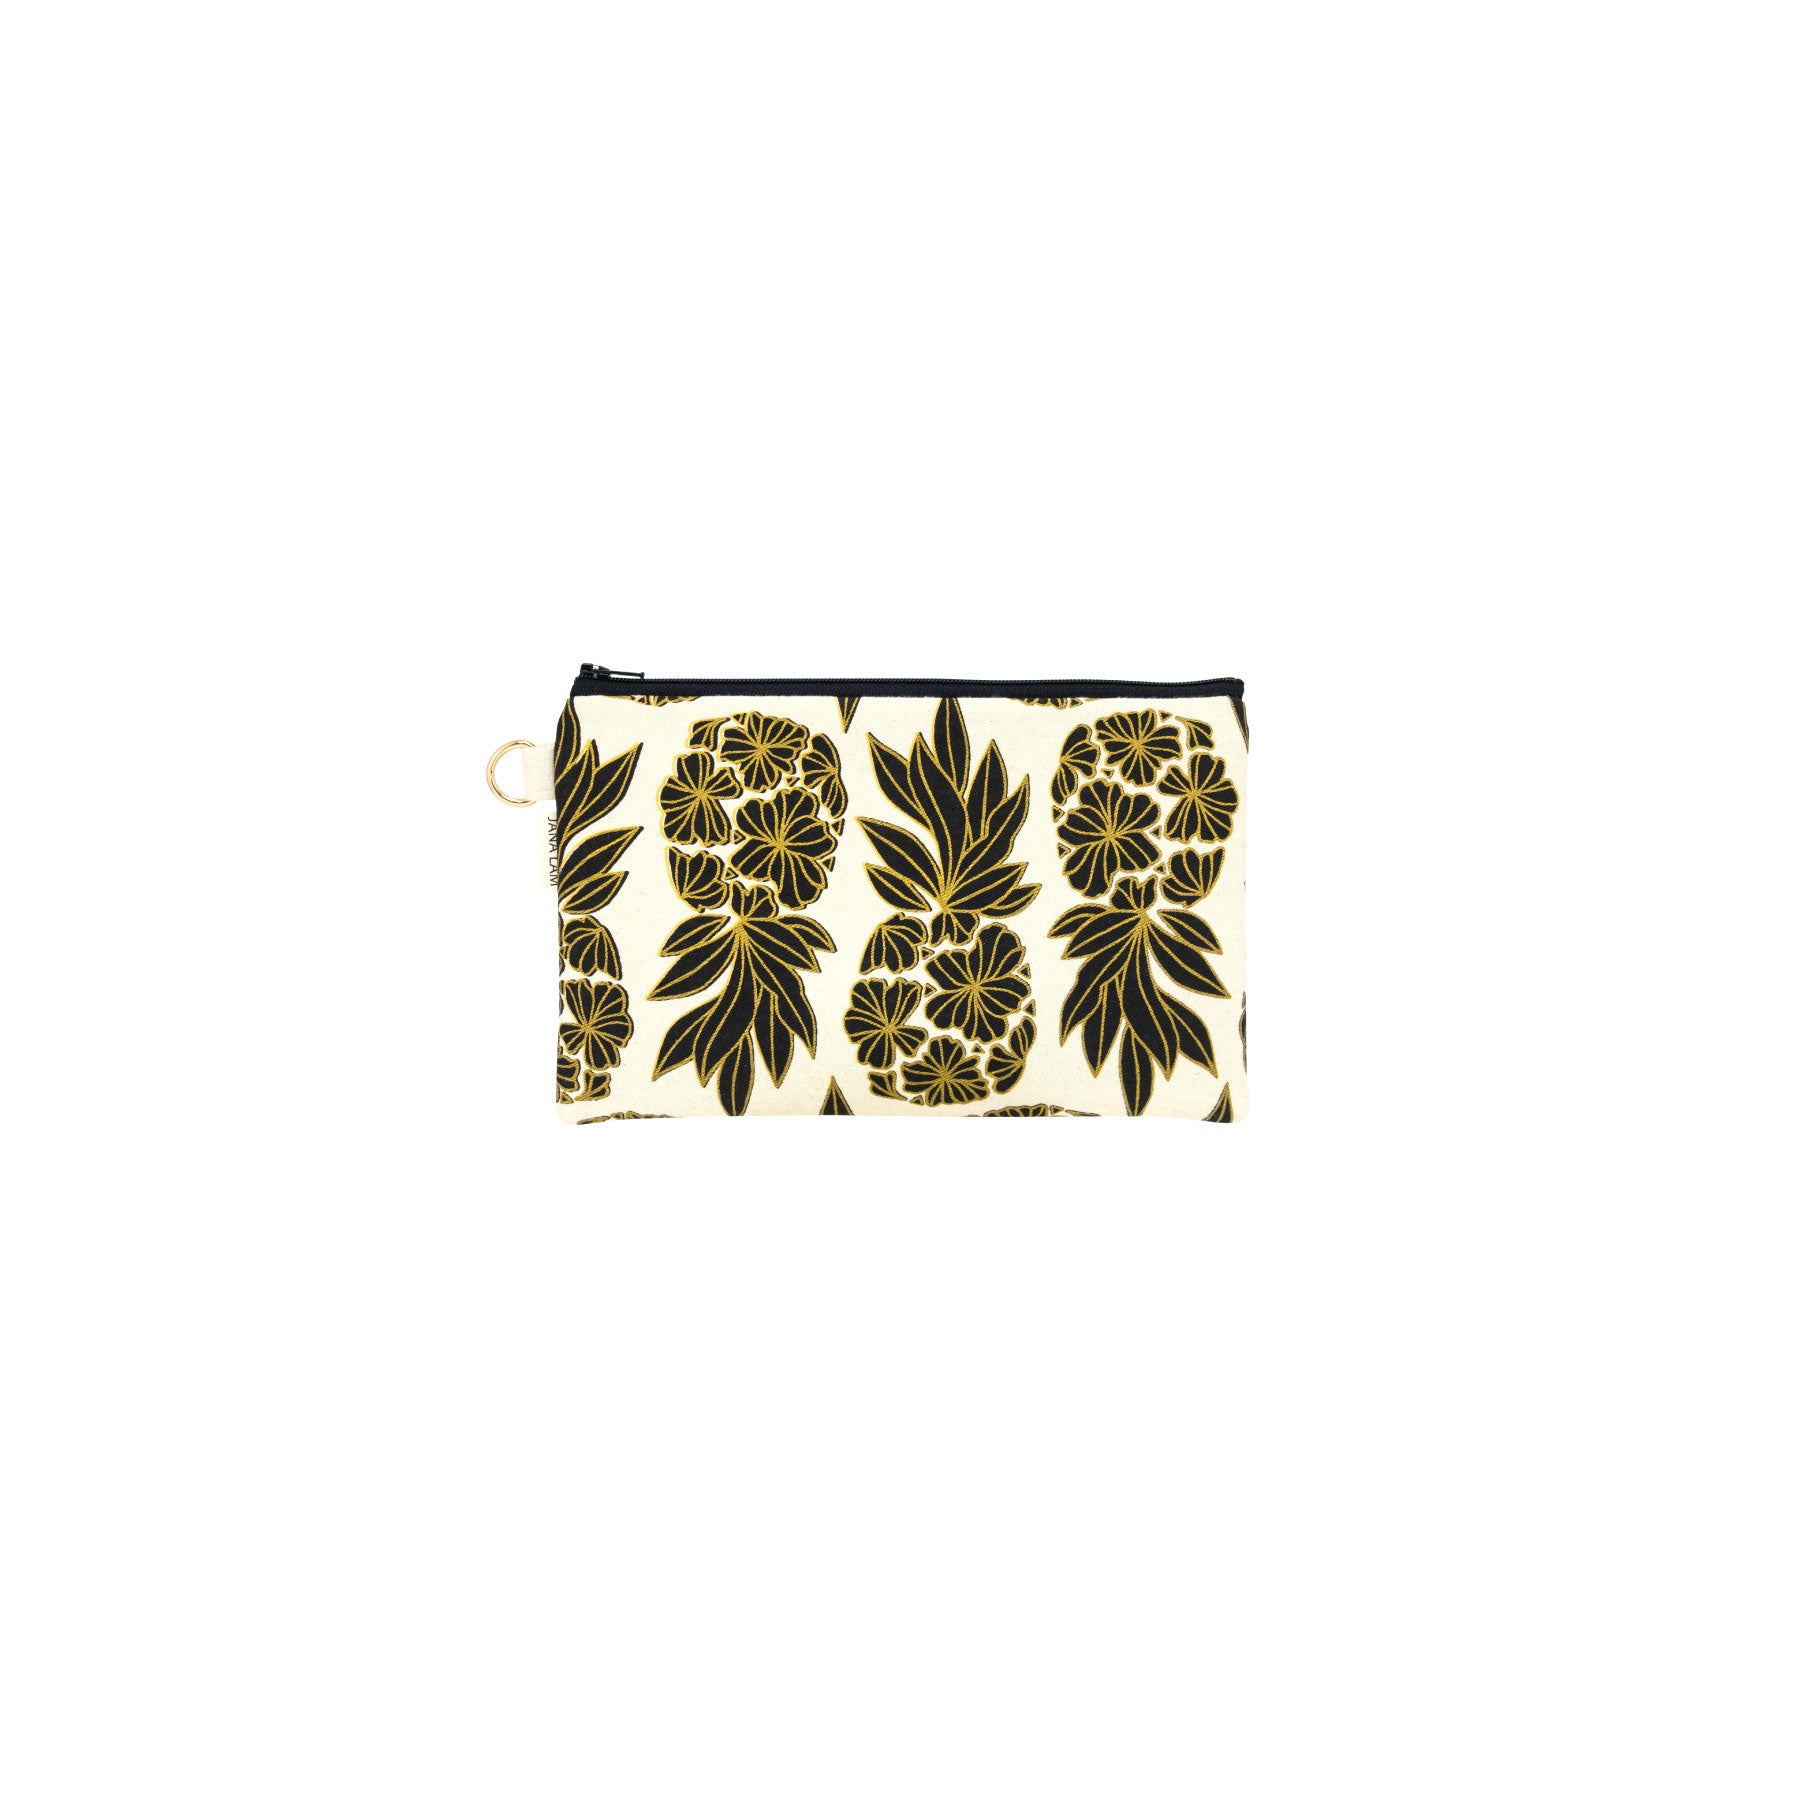 Classic Zipper Clutch • Seaflower Pineapple • Gold over Black on Natural Fabric